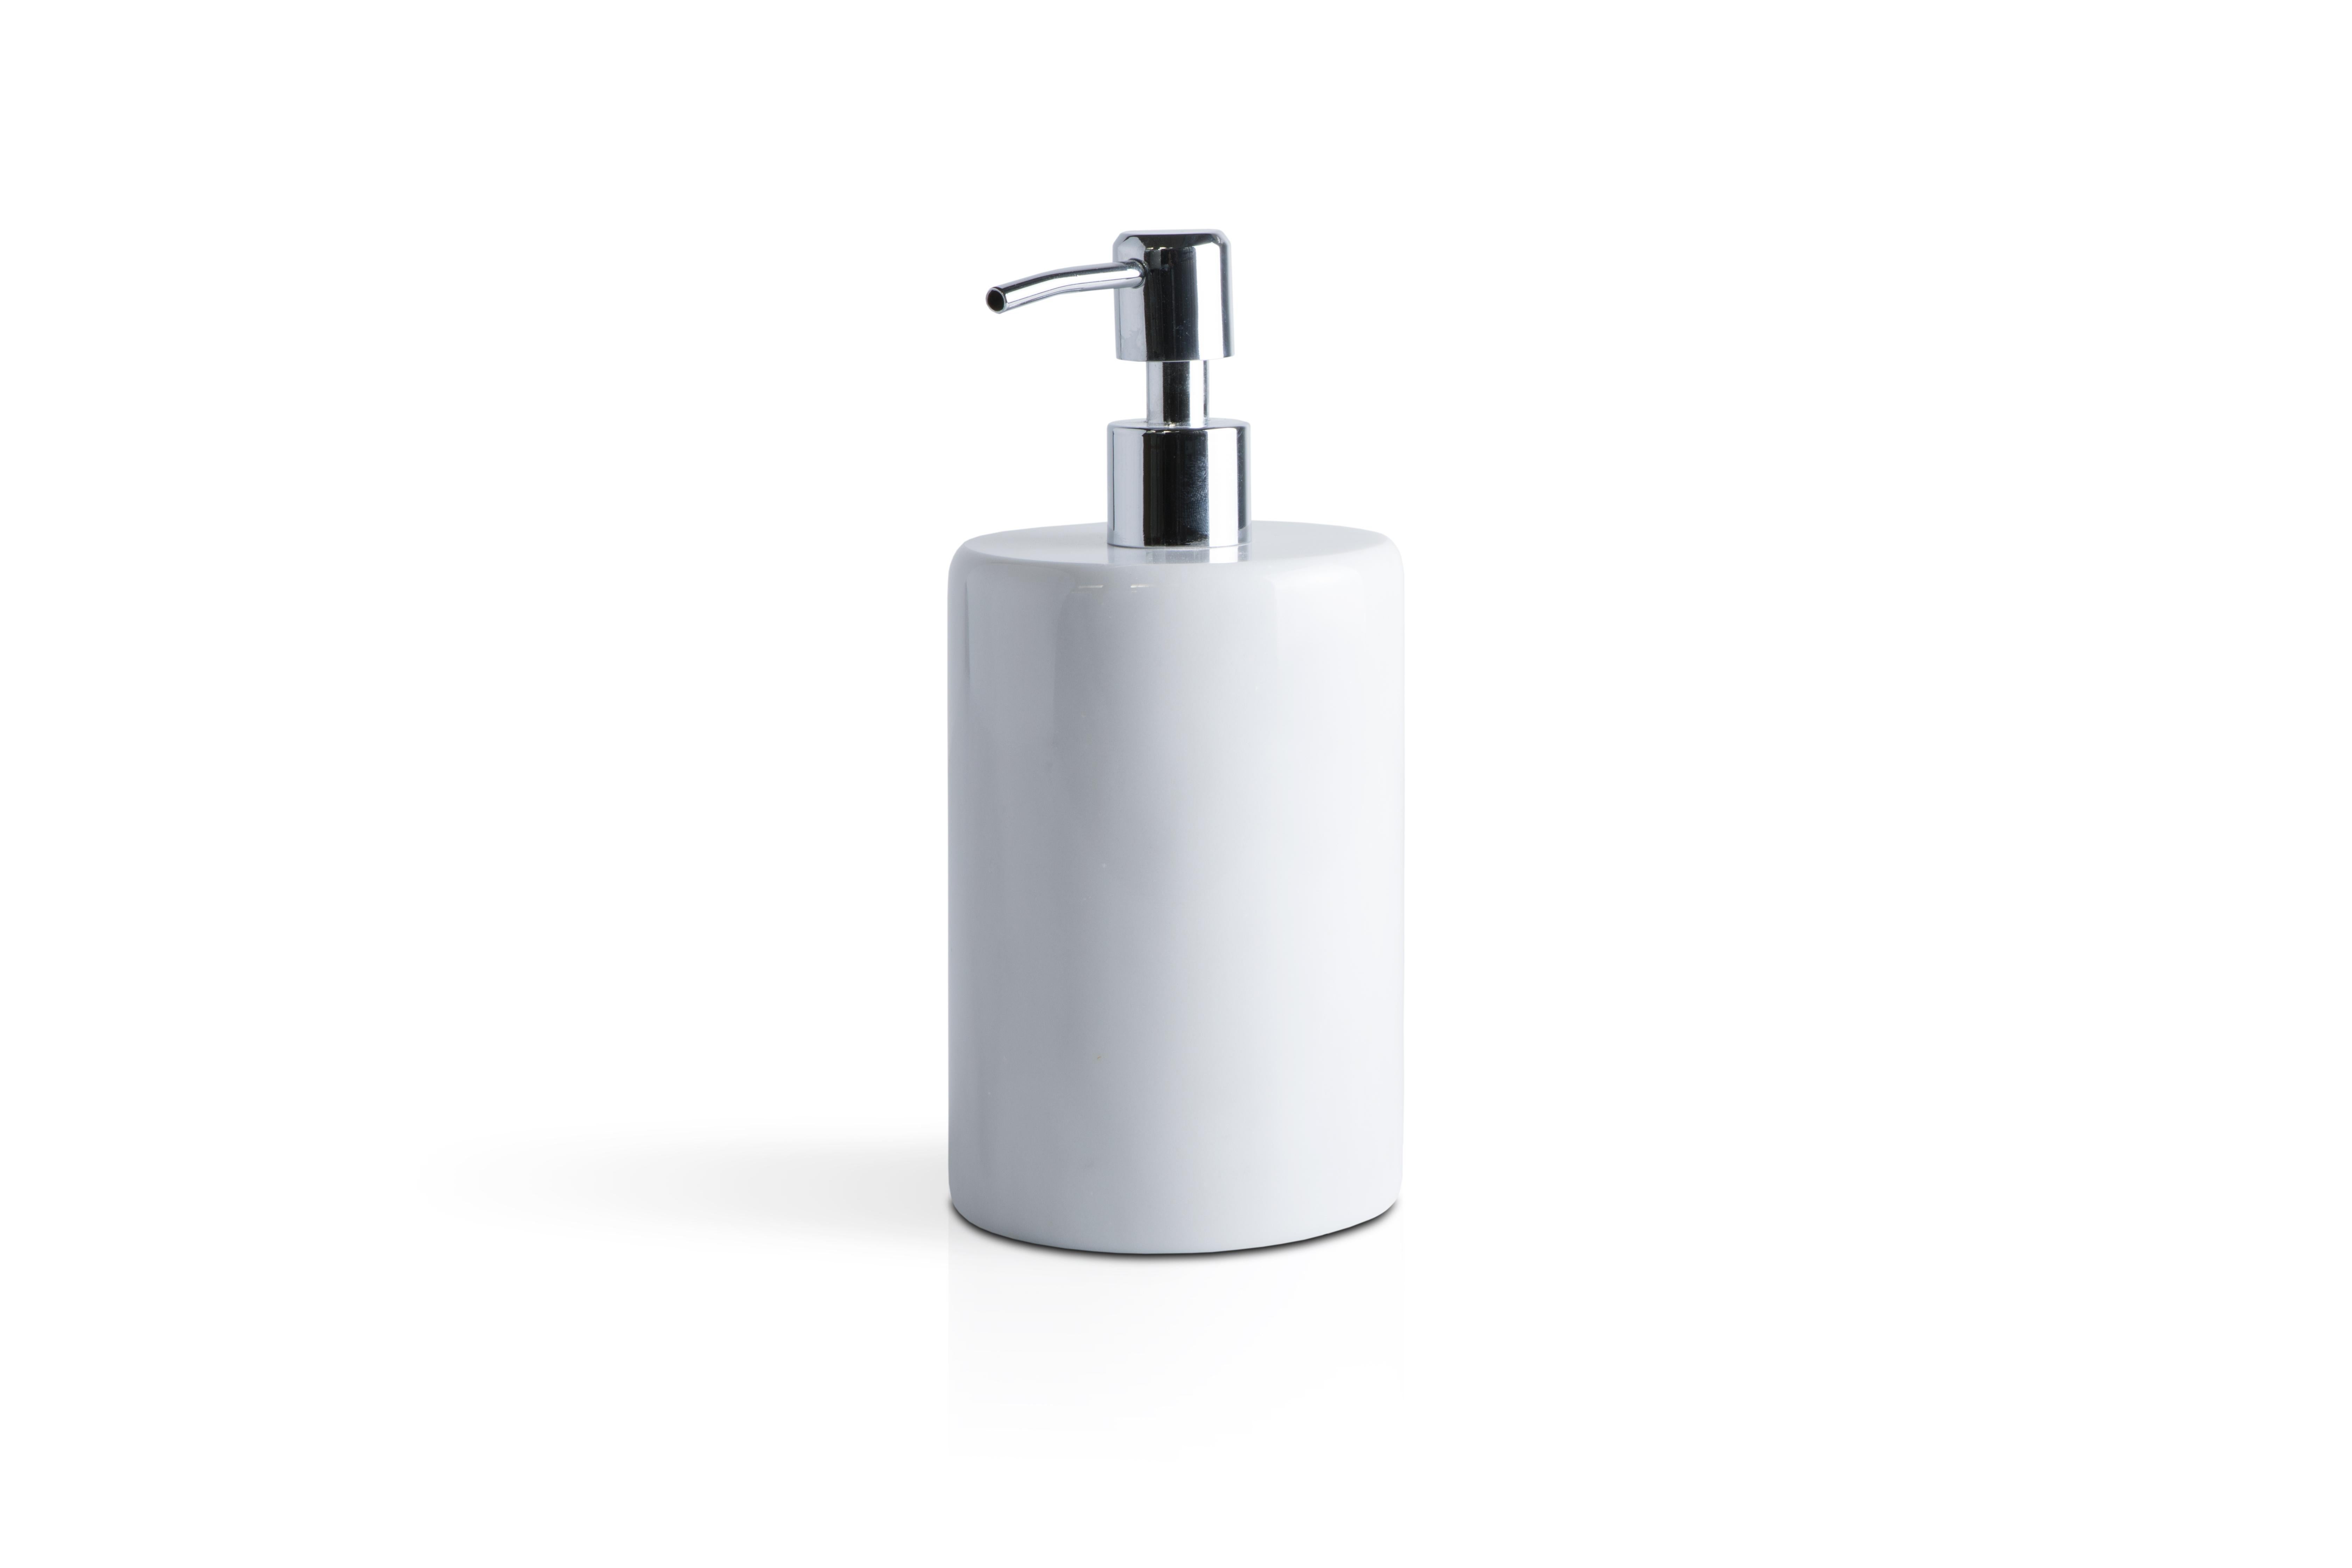 A rounded set for the bathroom in white Carrara marble which includes: One soap dispenser (diameter 9 x 19.5 cm), one toothbrush holder (diameter 7 x 12 cm), one soap dish (10 x 2 cm).
Each piece is in a way unique (since each marble block is